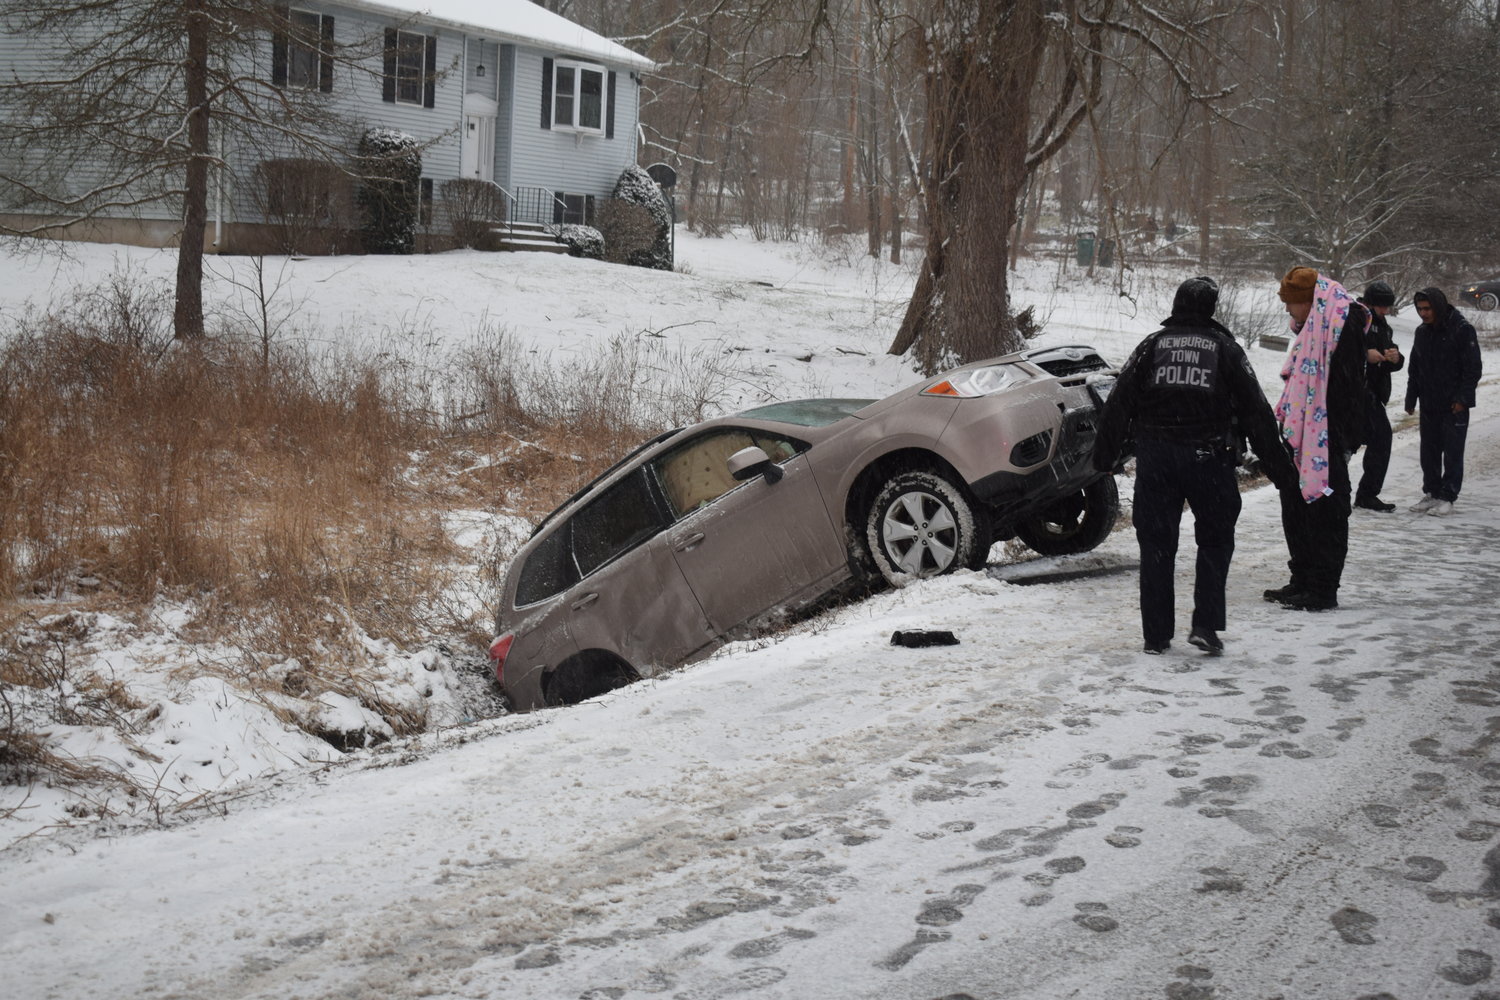 Two vehicles  ended up in a ditch, Tuesday afternoon following an accident on snow-covered Rock Cut Road